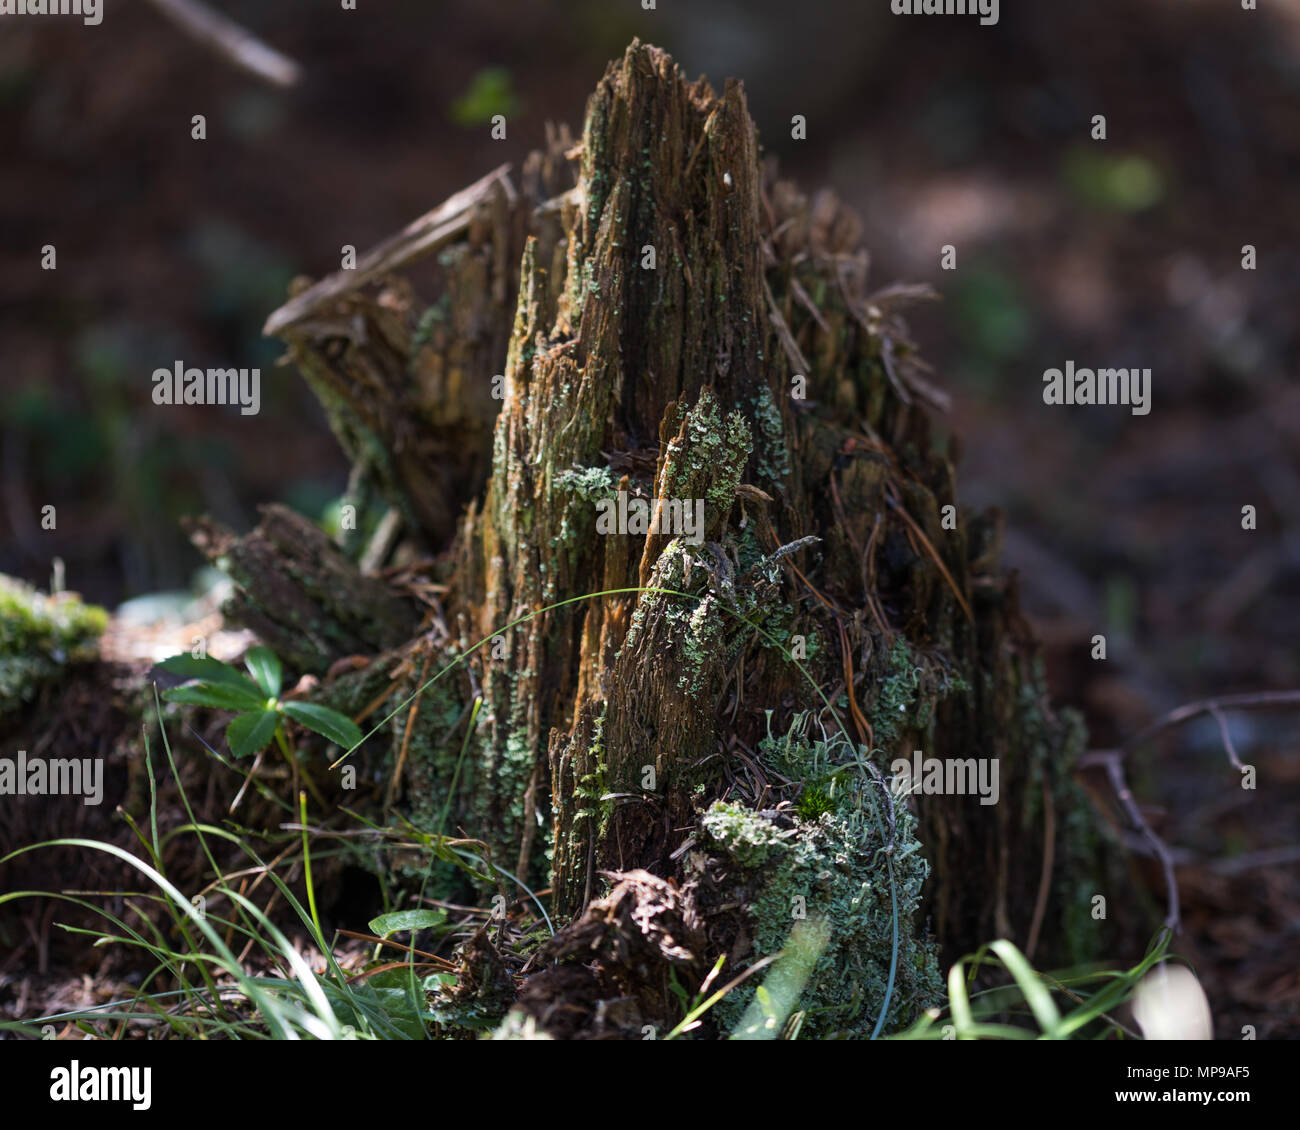 Decaying tree stump with lichens and fungi Stock Photo